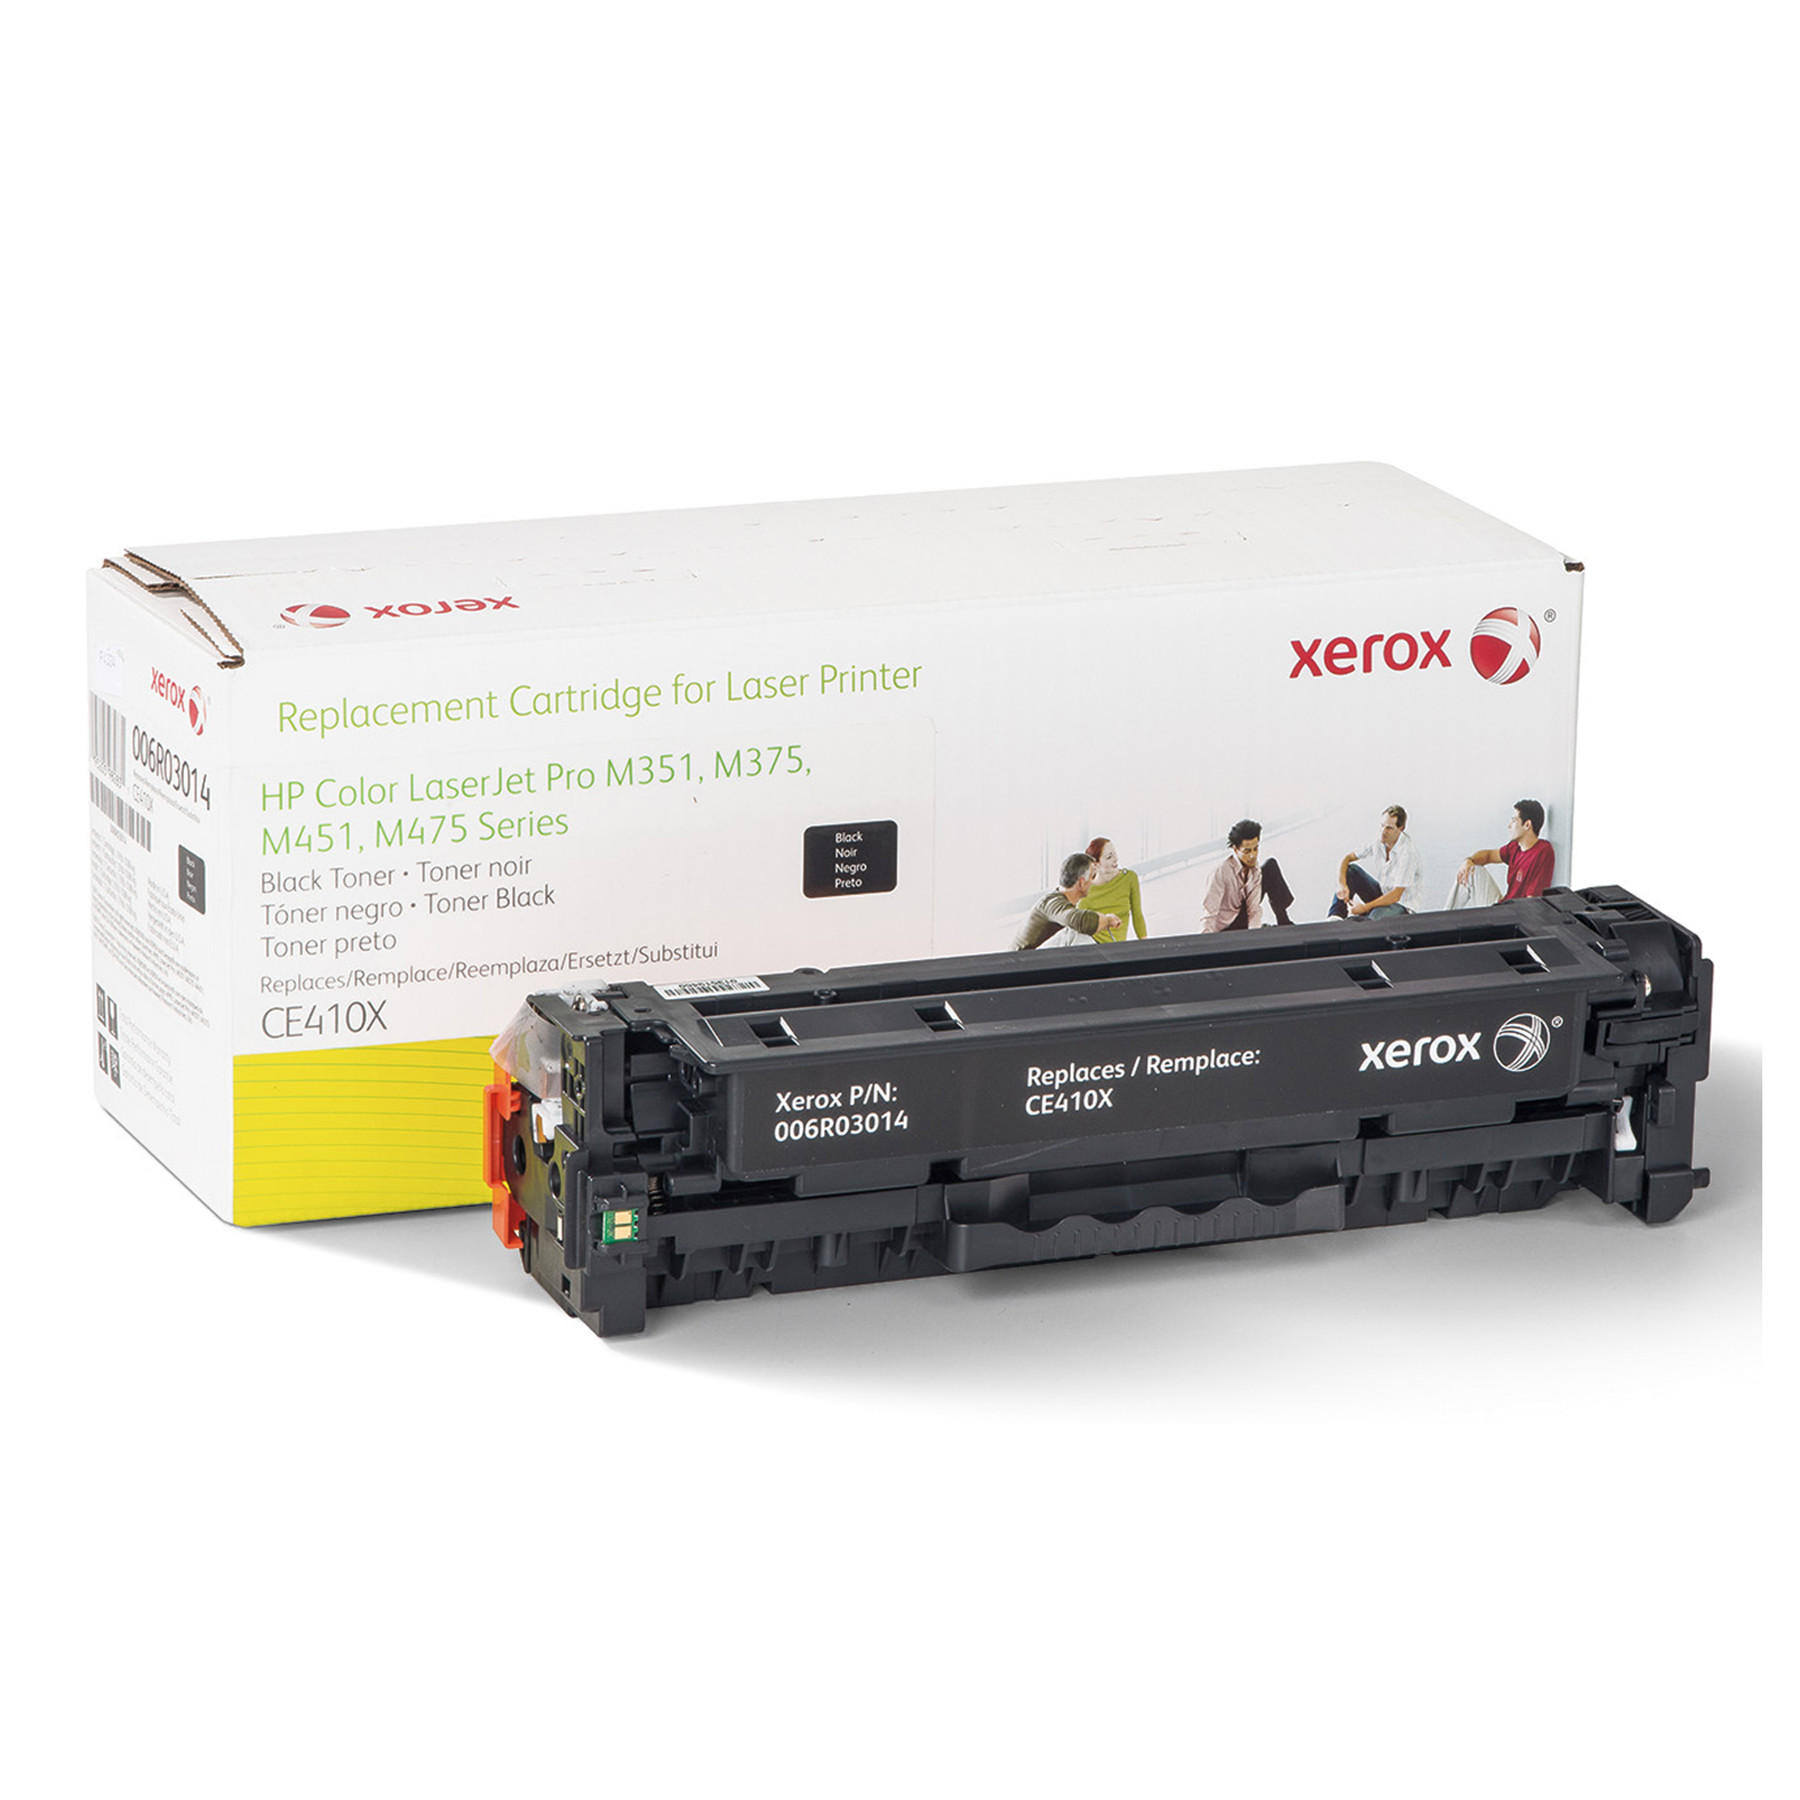 Xerox 006R03014 Replacement High-Yield Toner for CE410X (305X), Black - image 1 of 2